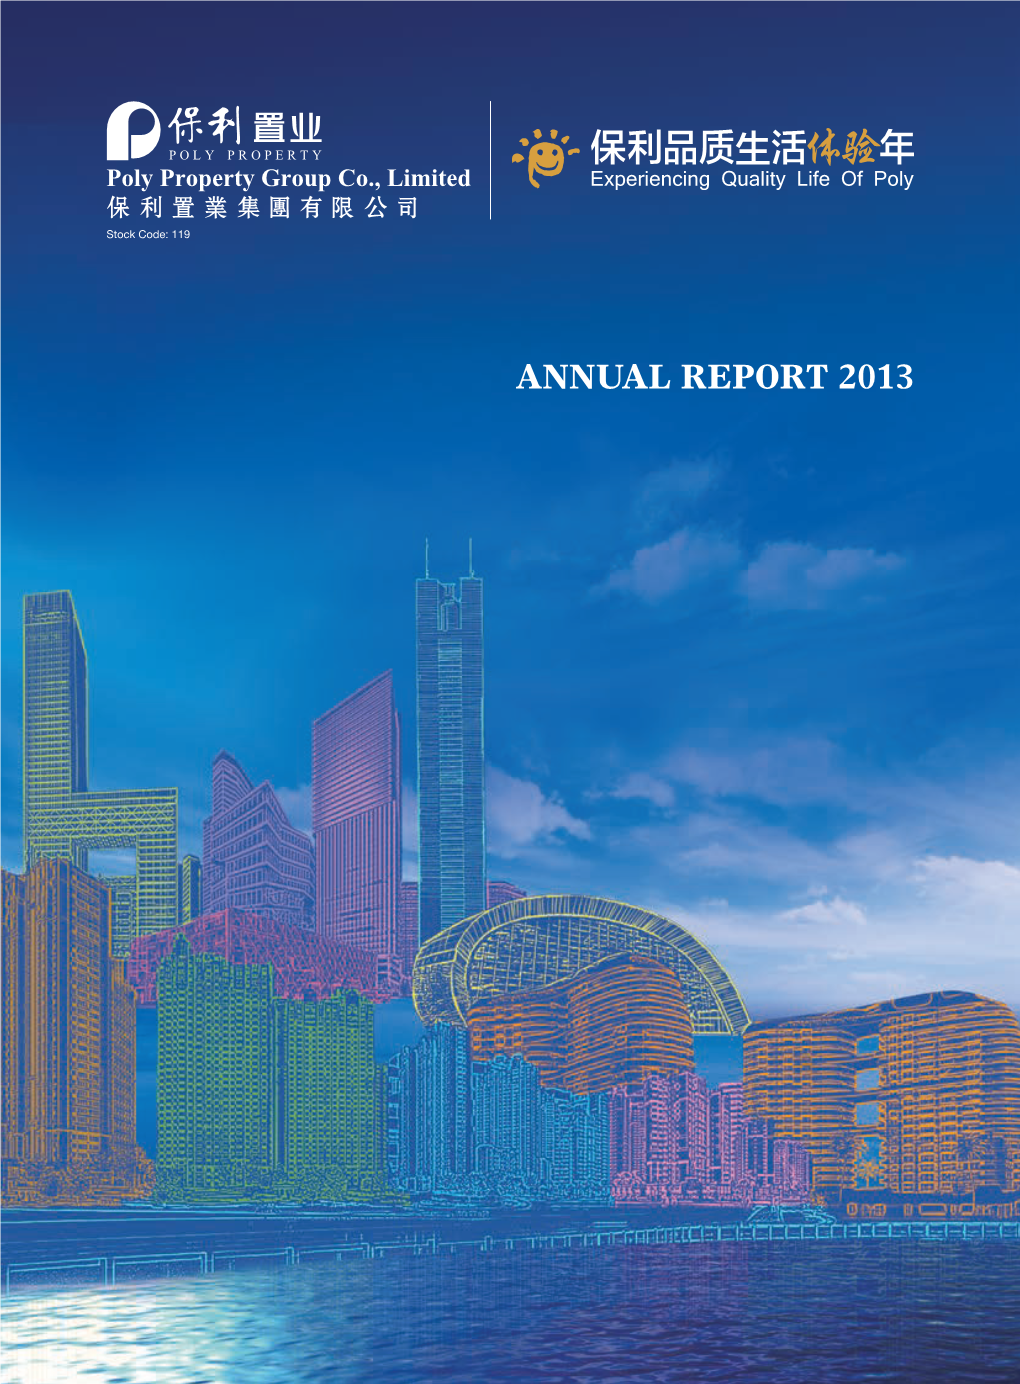 ANNUAL REPORT 2013 Vision the Group Aspires to Be a Leading Chinese Property Developer with a Renowned Brand Backed by Cultural Substance